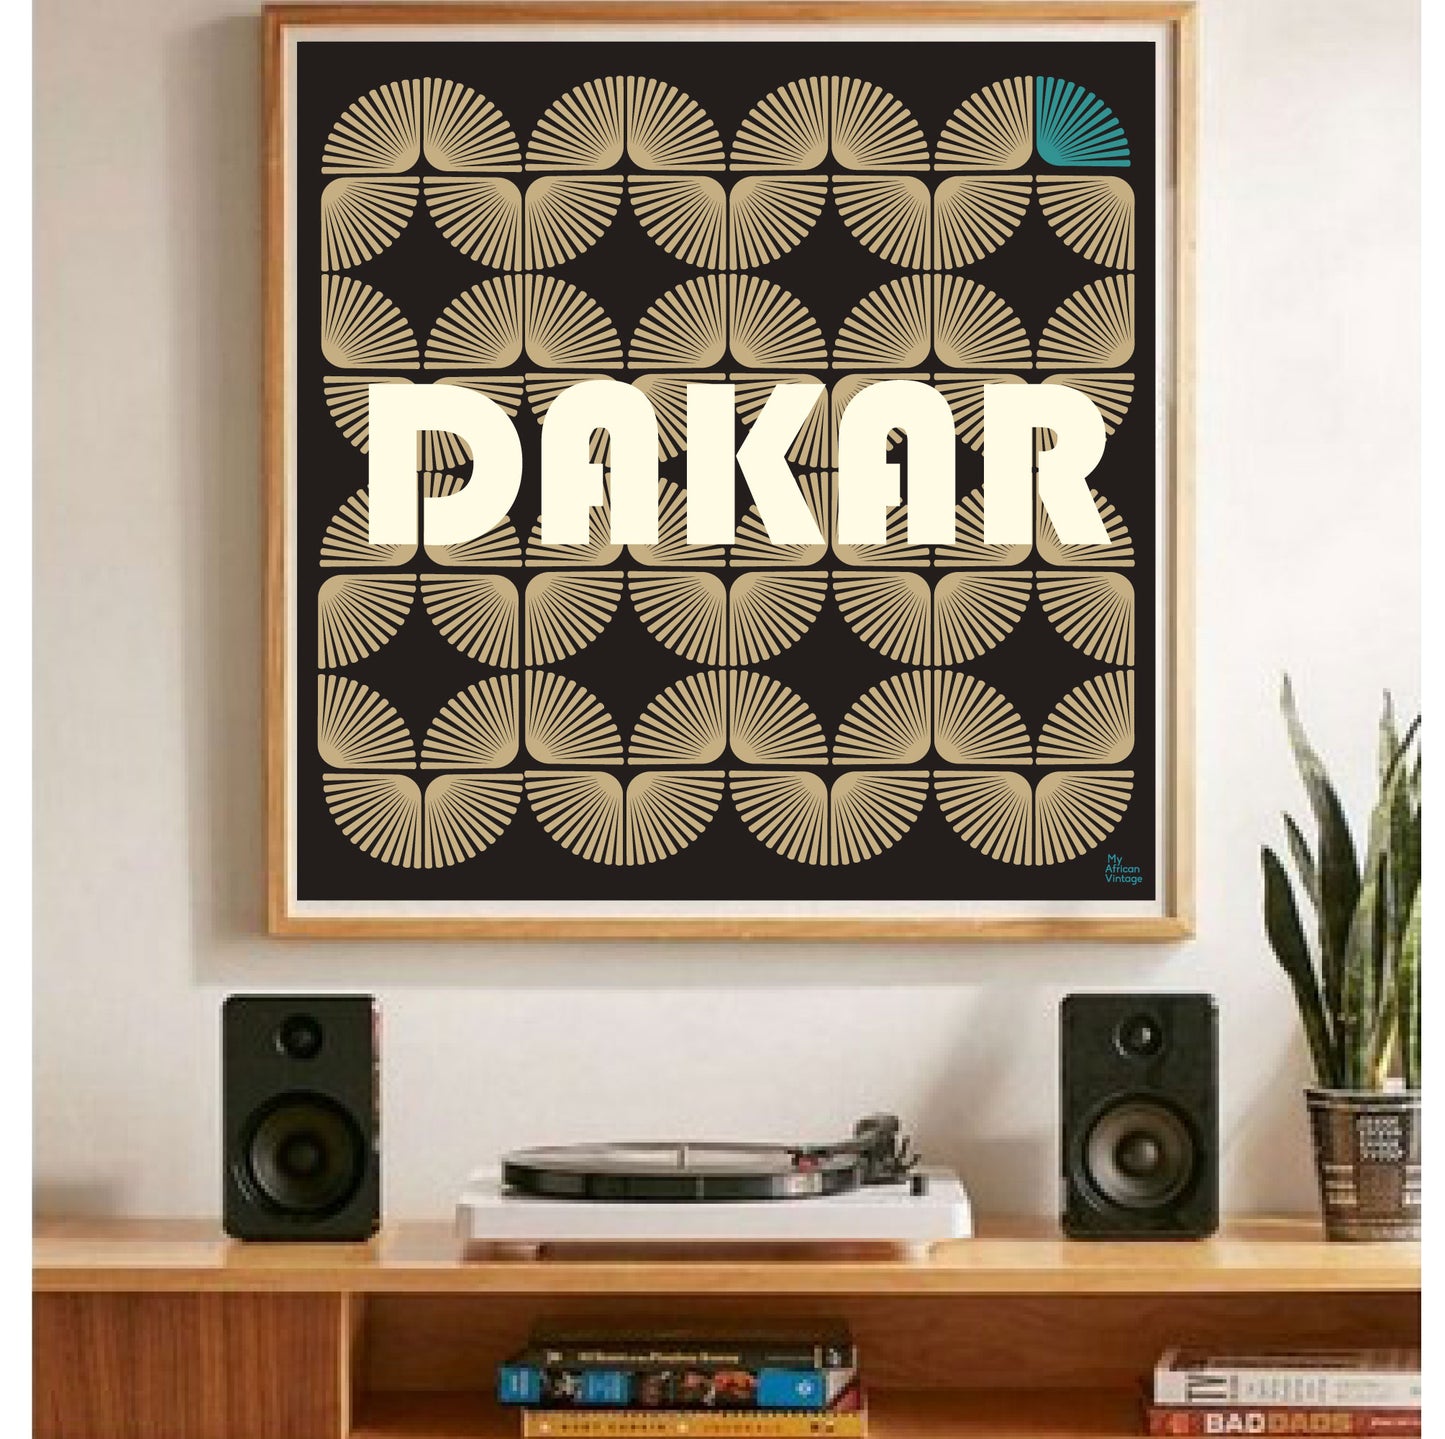 "Dakar" retro style poster - "My African Vintage" collection